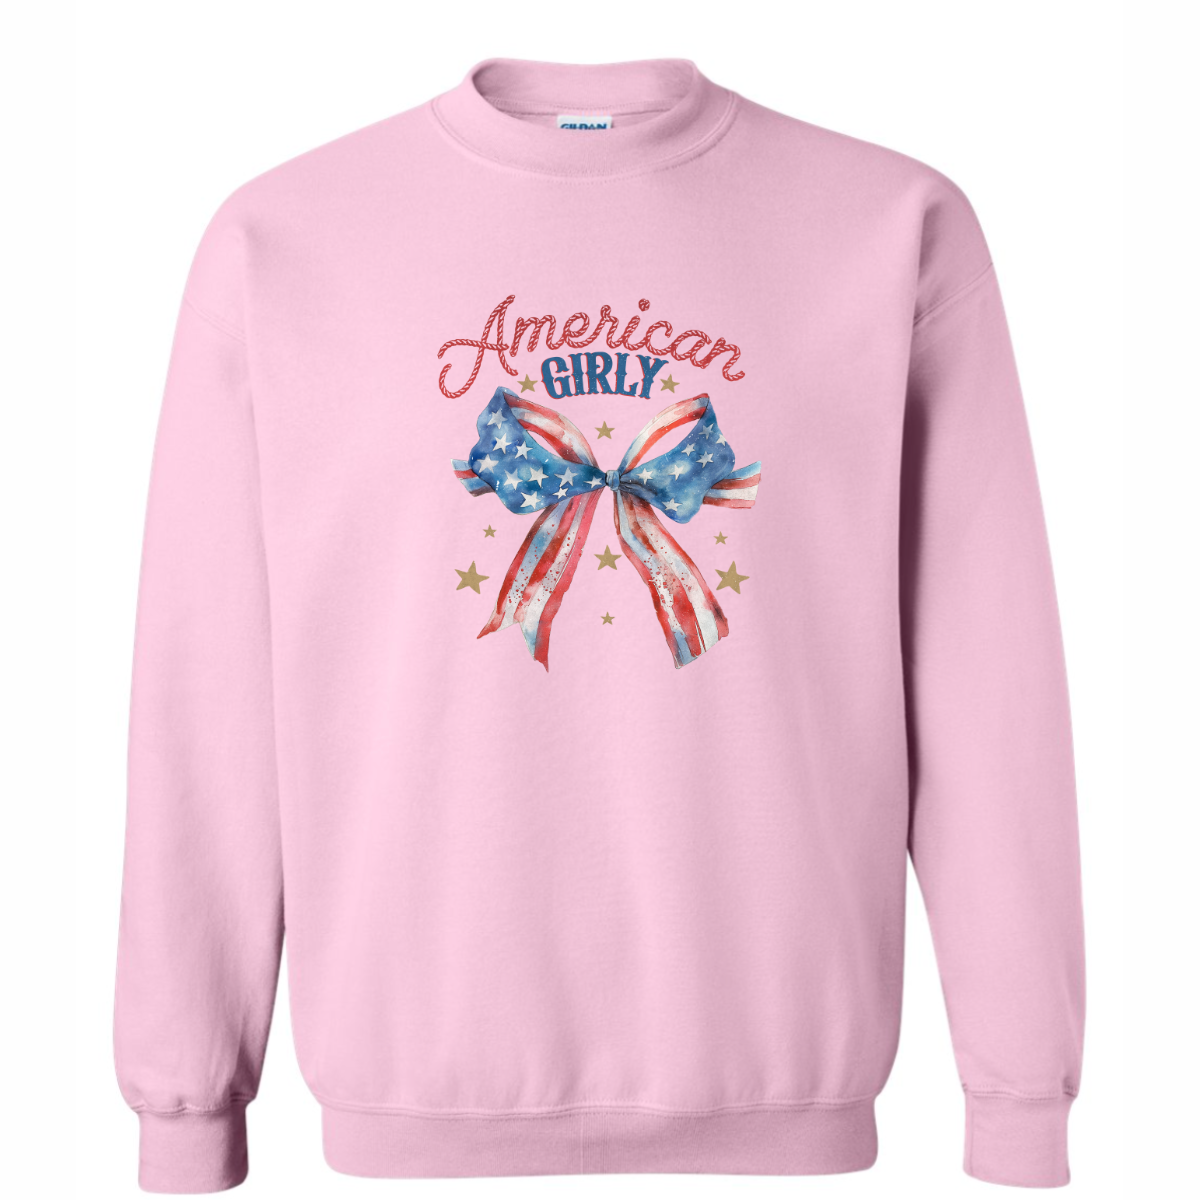 American Girly Coquette